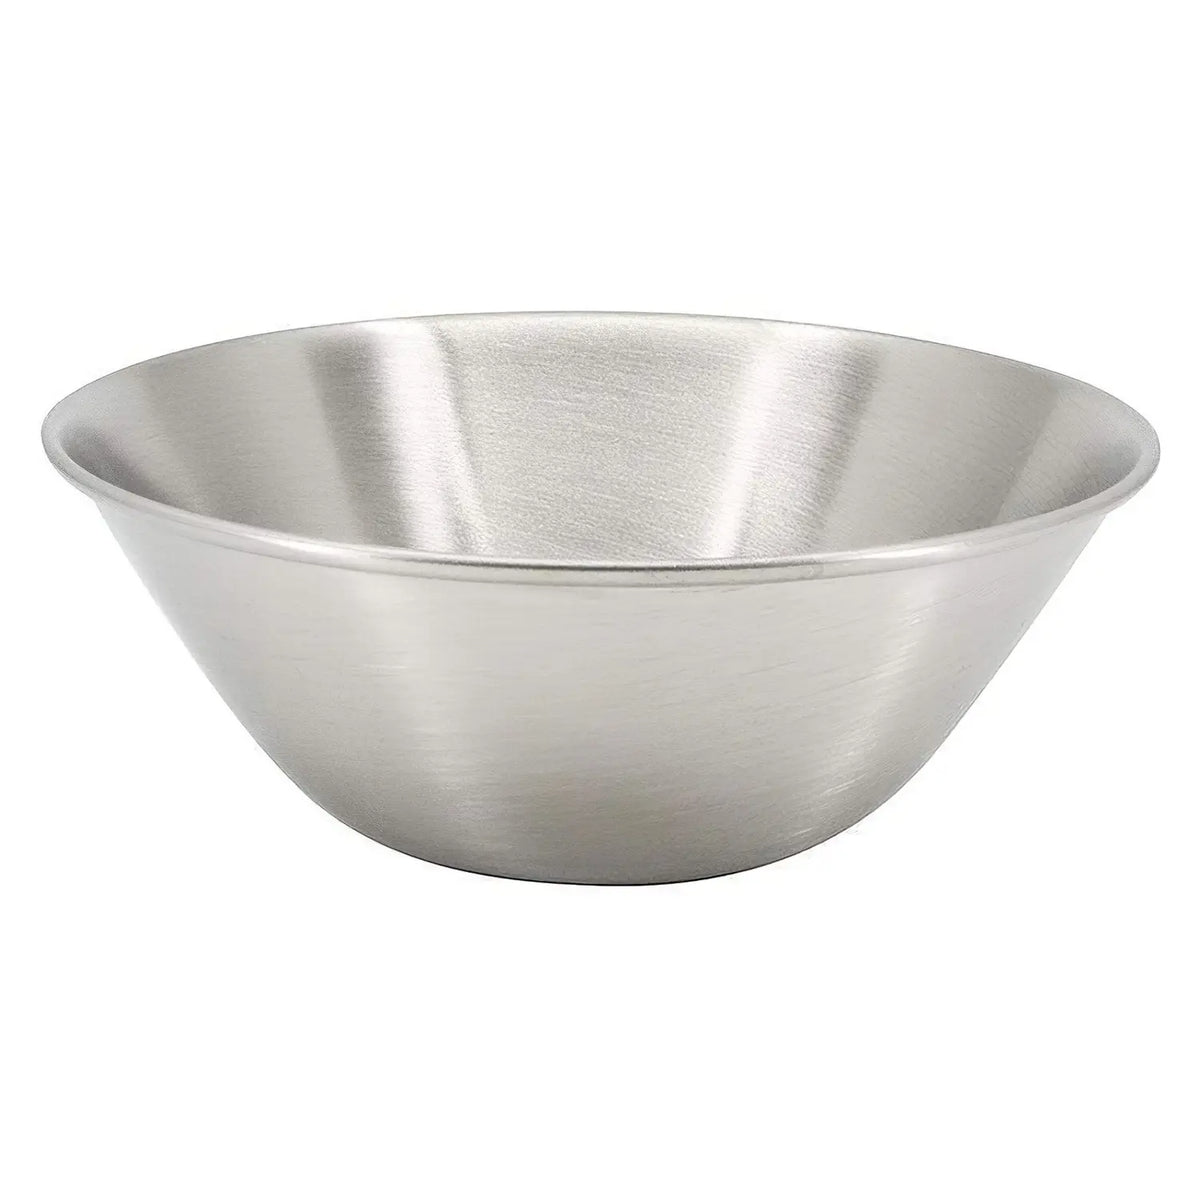 1 Set Stainless Steel Mixing Bowl Large Mixing Bowl Kitchen Stainless Steel  Soup Bowl with Lid